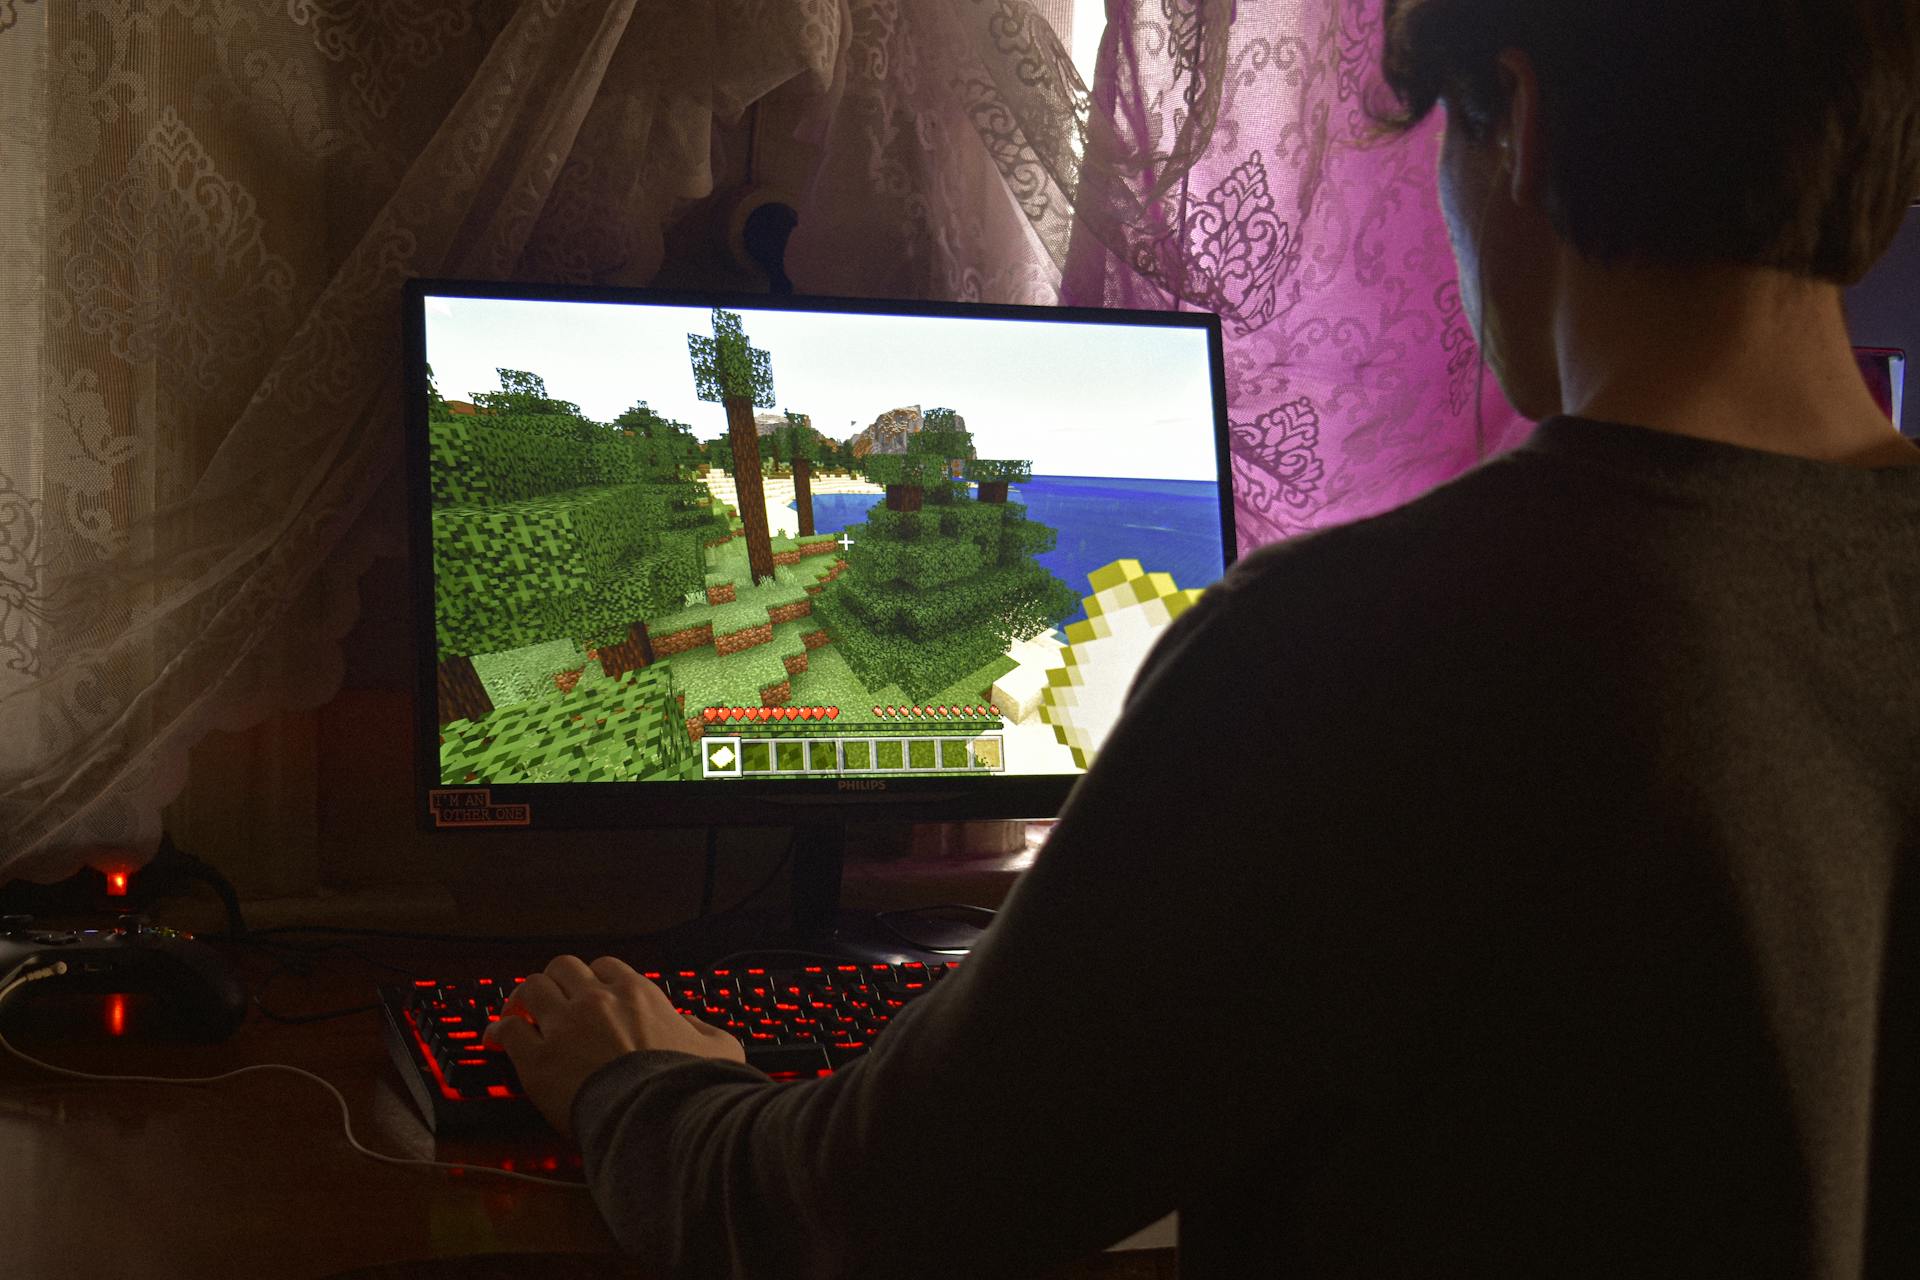 A person gaming | Source: Pexels